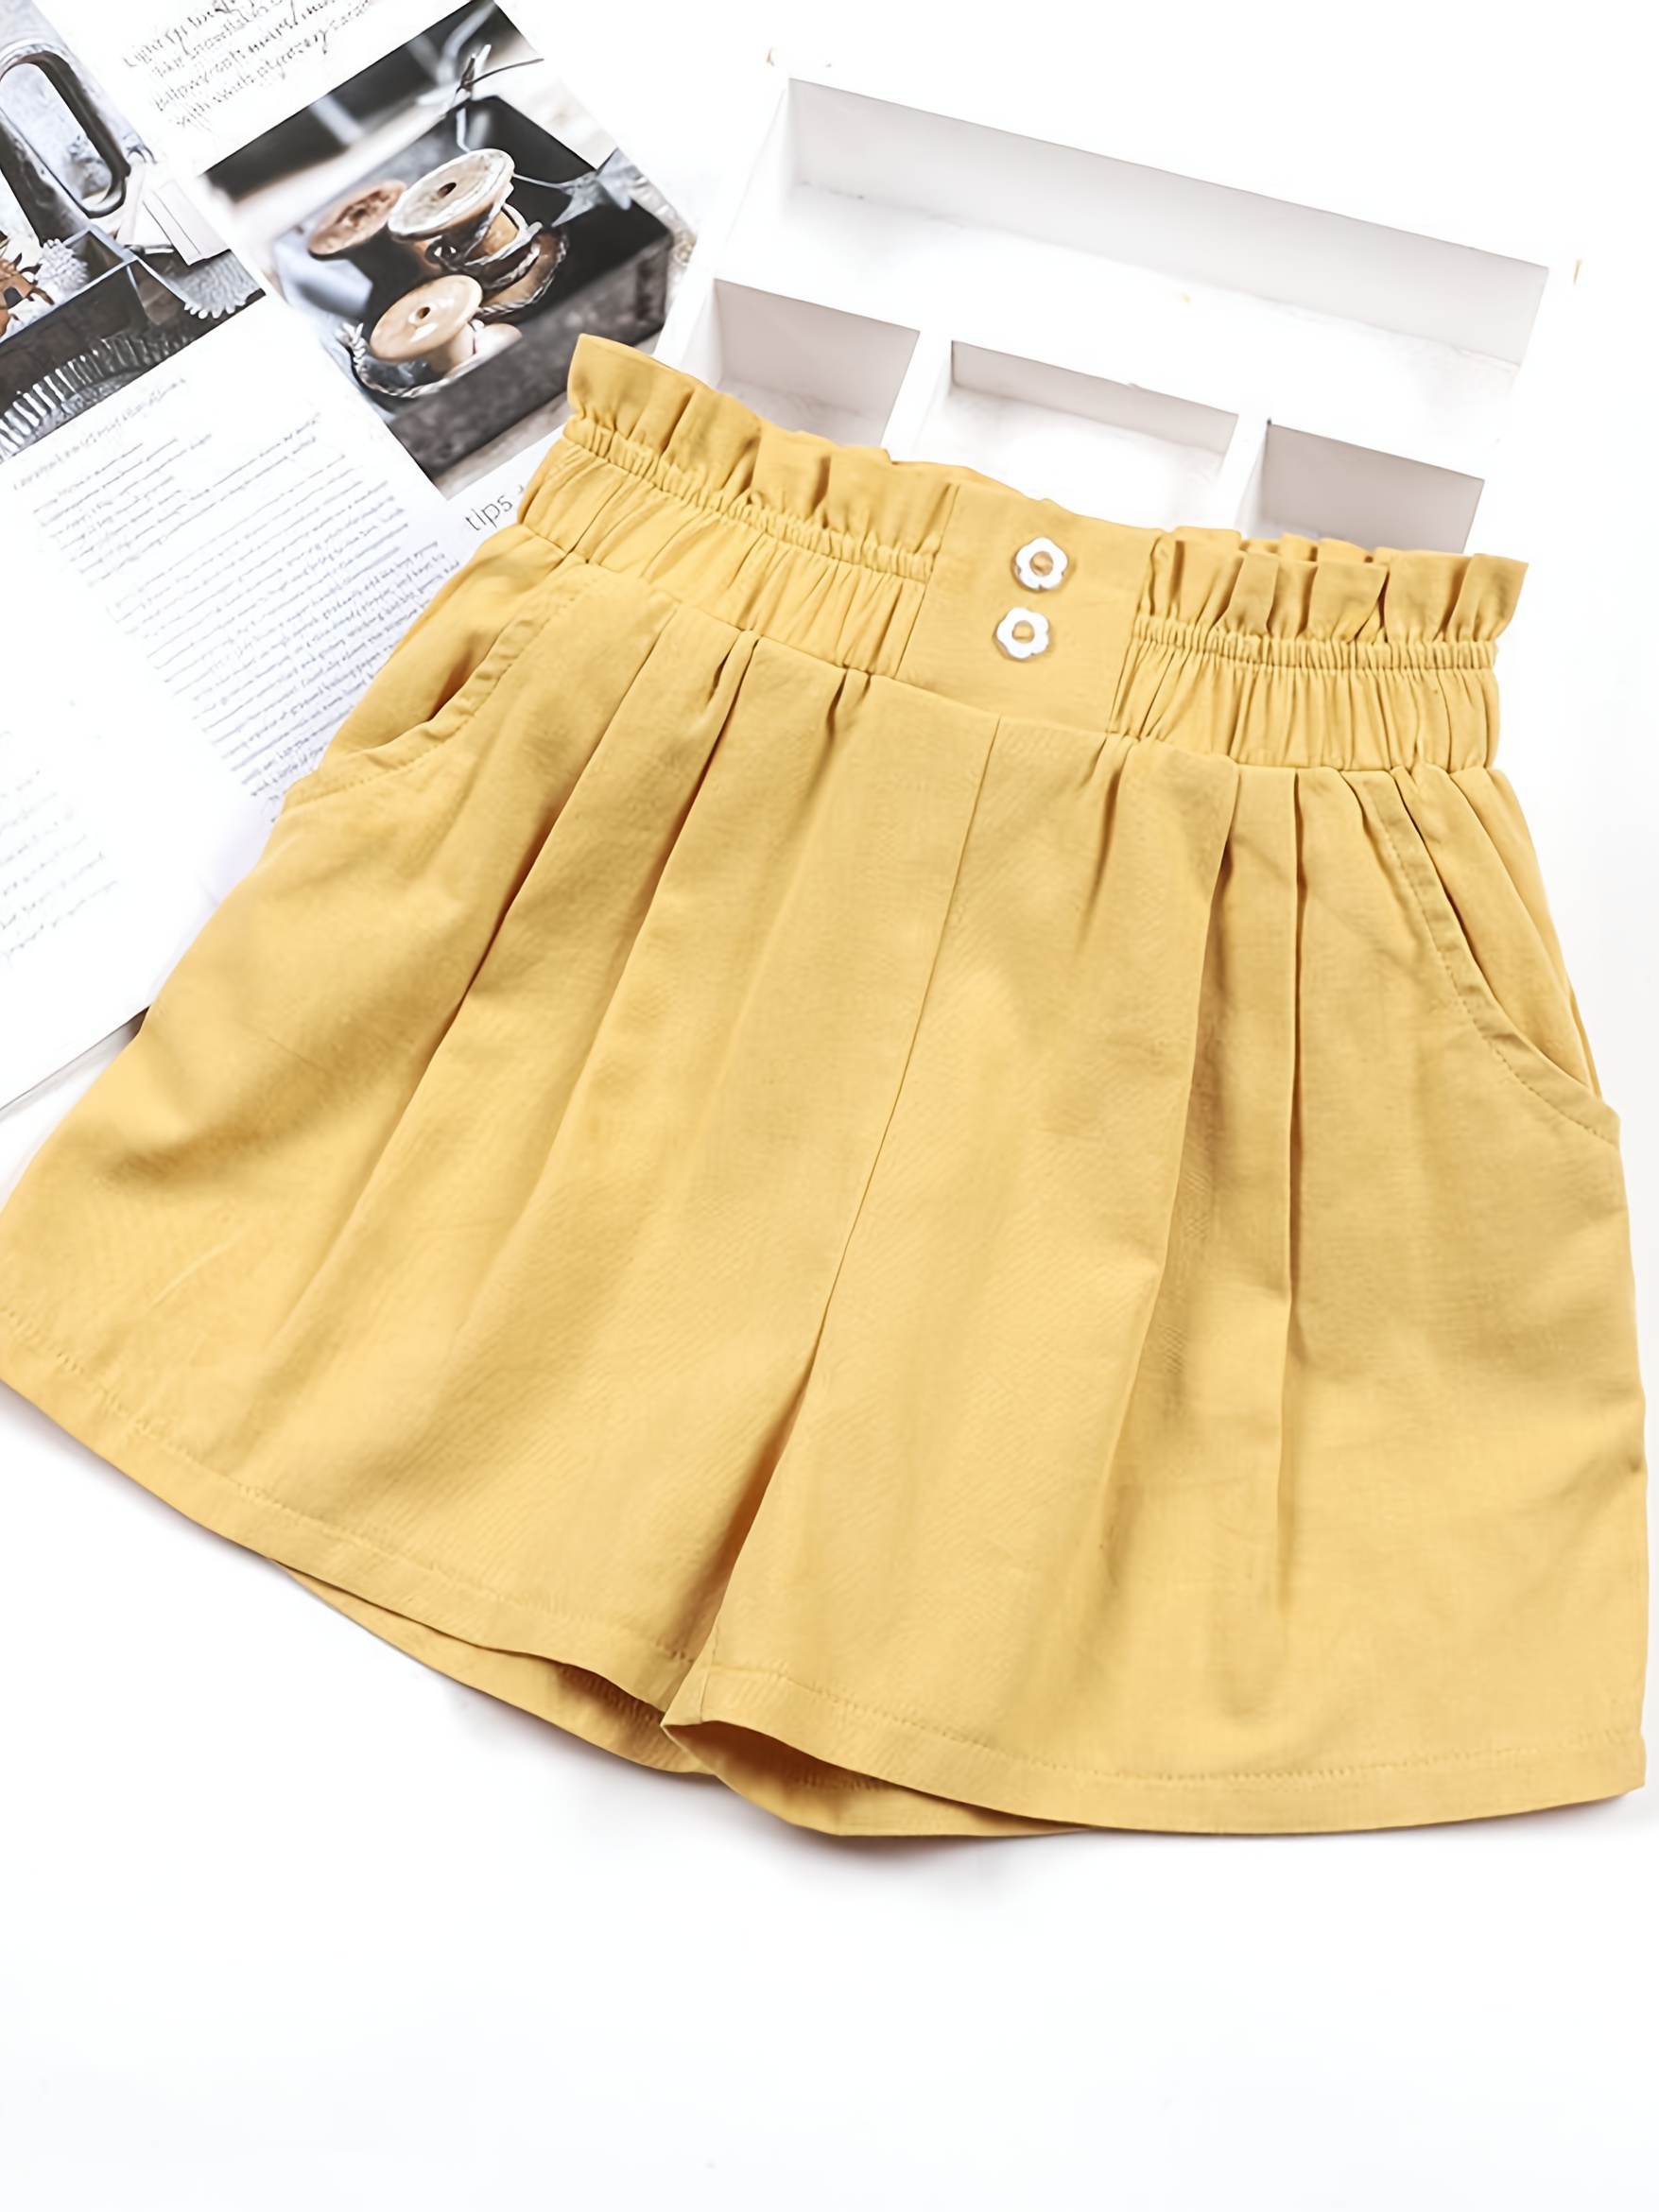 Shop Summer Shorts For Girls at Our Store - Foreign Style Hot Pants For Kids